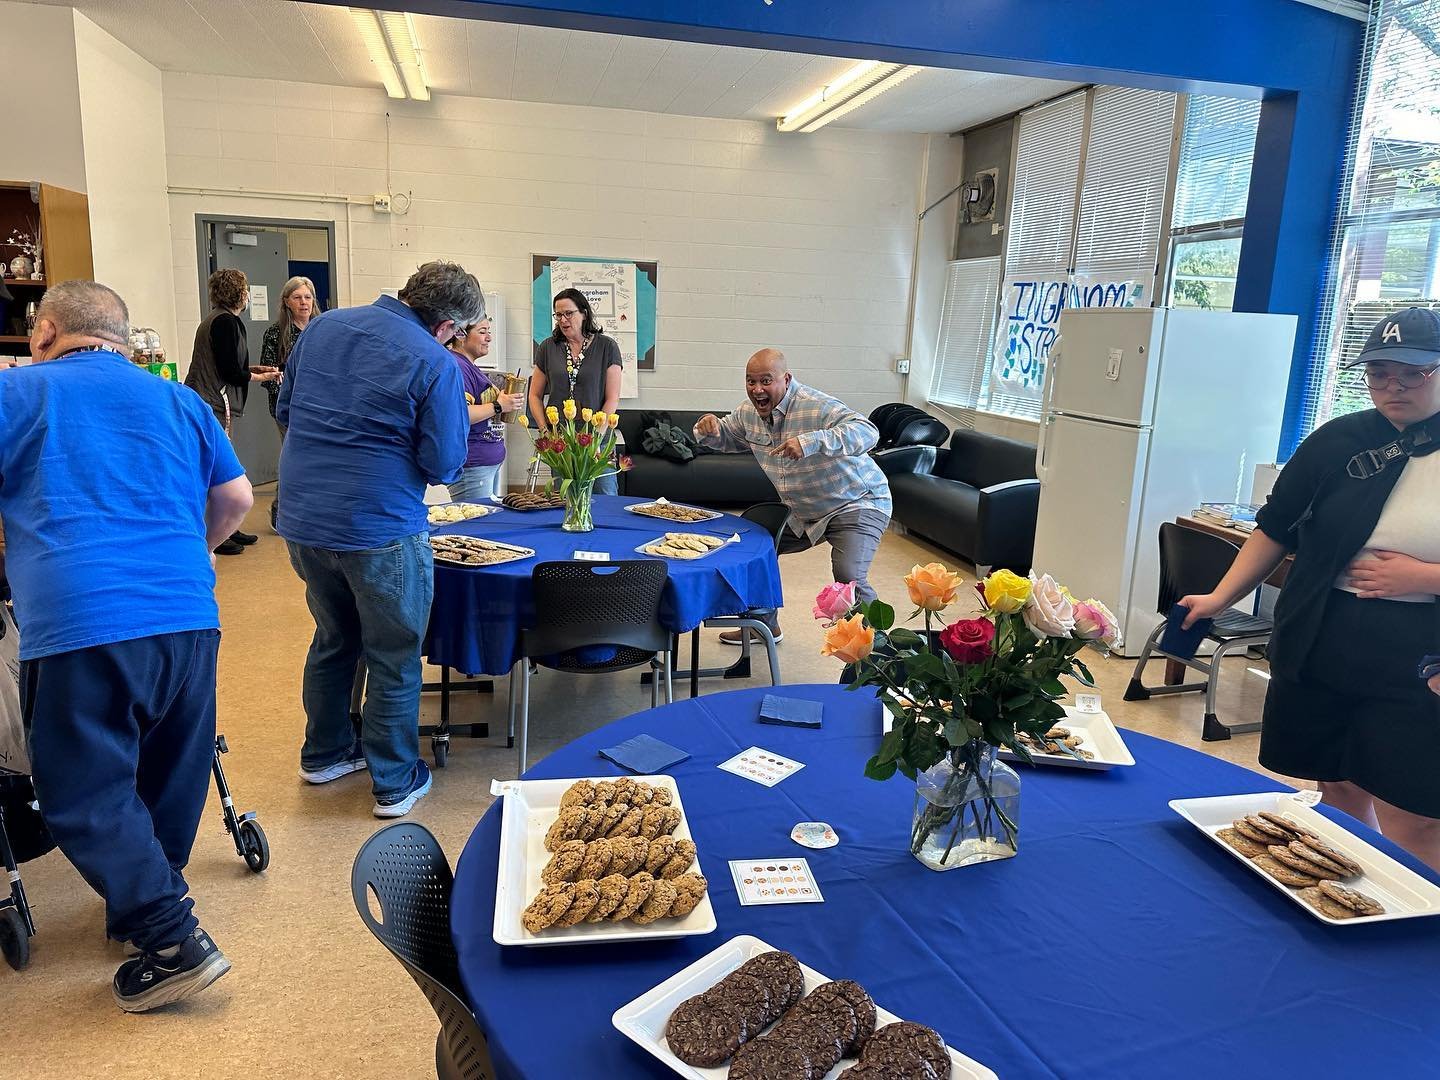 Teachers and staff enjoyed delicious Hello Robin cookies today donated by FOI. Thank you teachers and staff for all that you do to help prepare the next generation for life after high school.